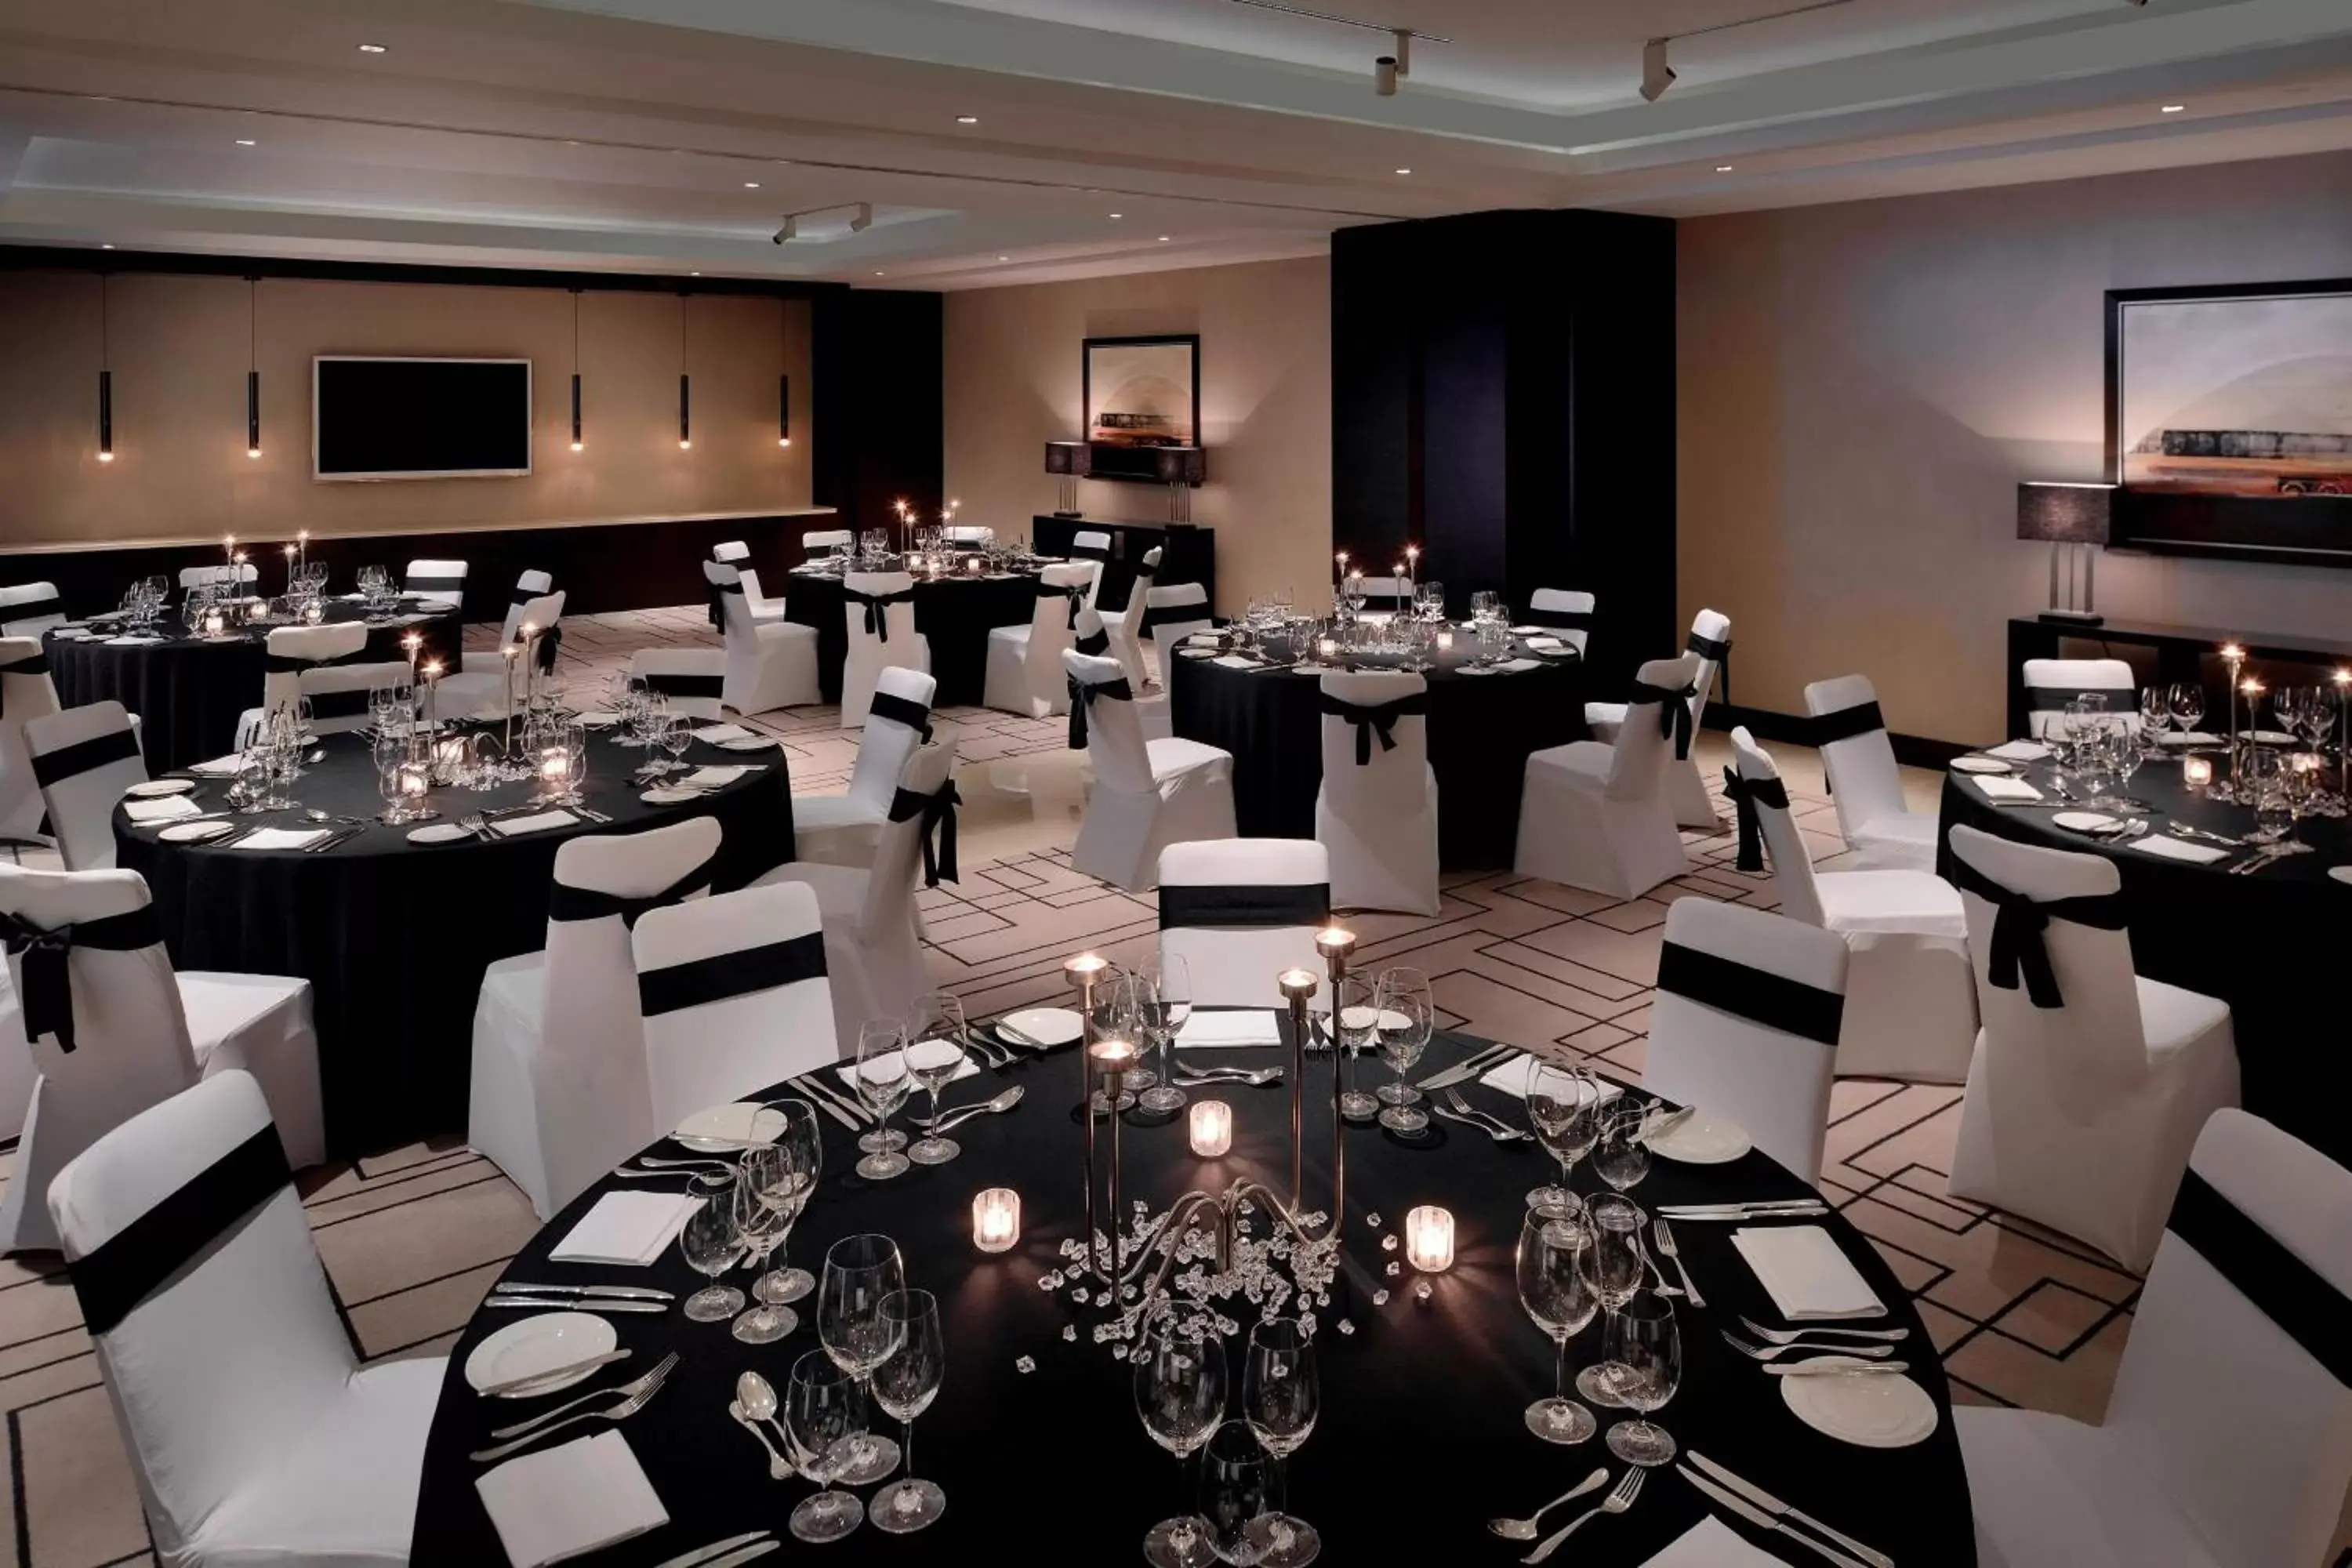 Meeting/conference room, Banquet Facilities in JW Marriott Marquis Hotel Dubai